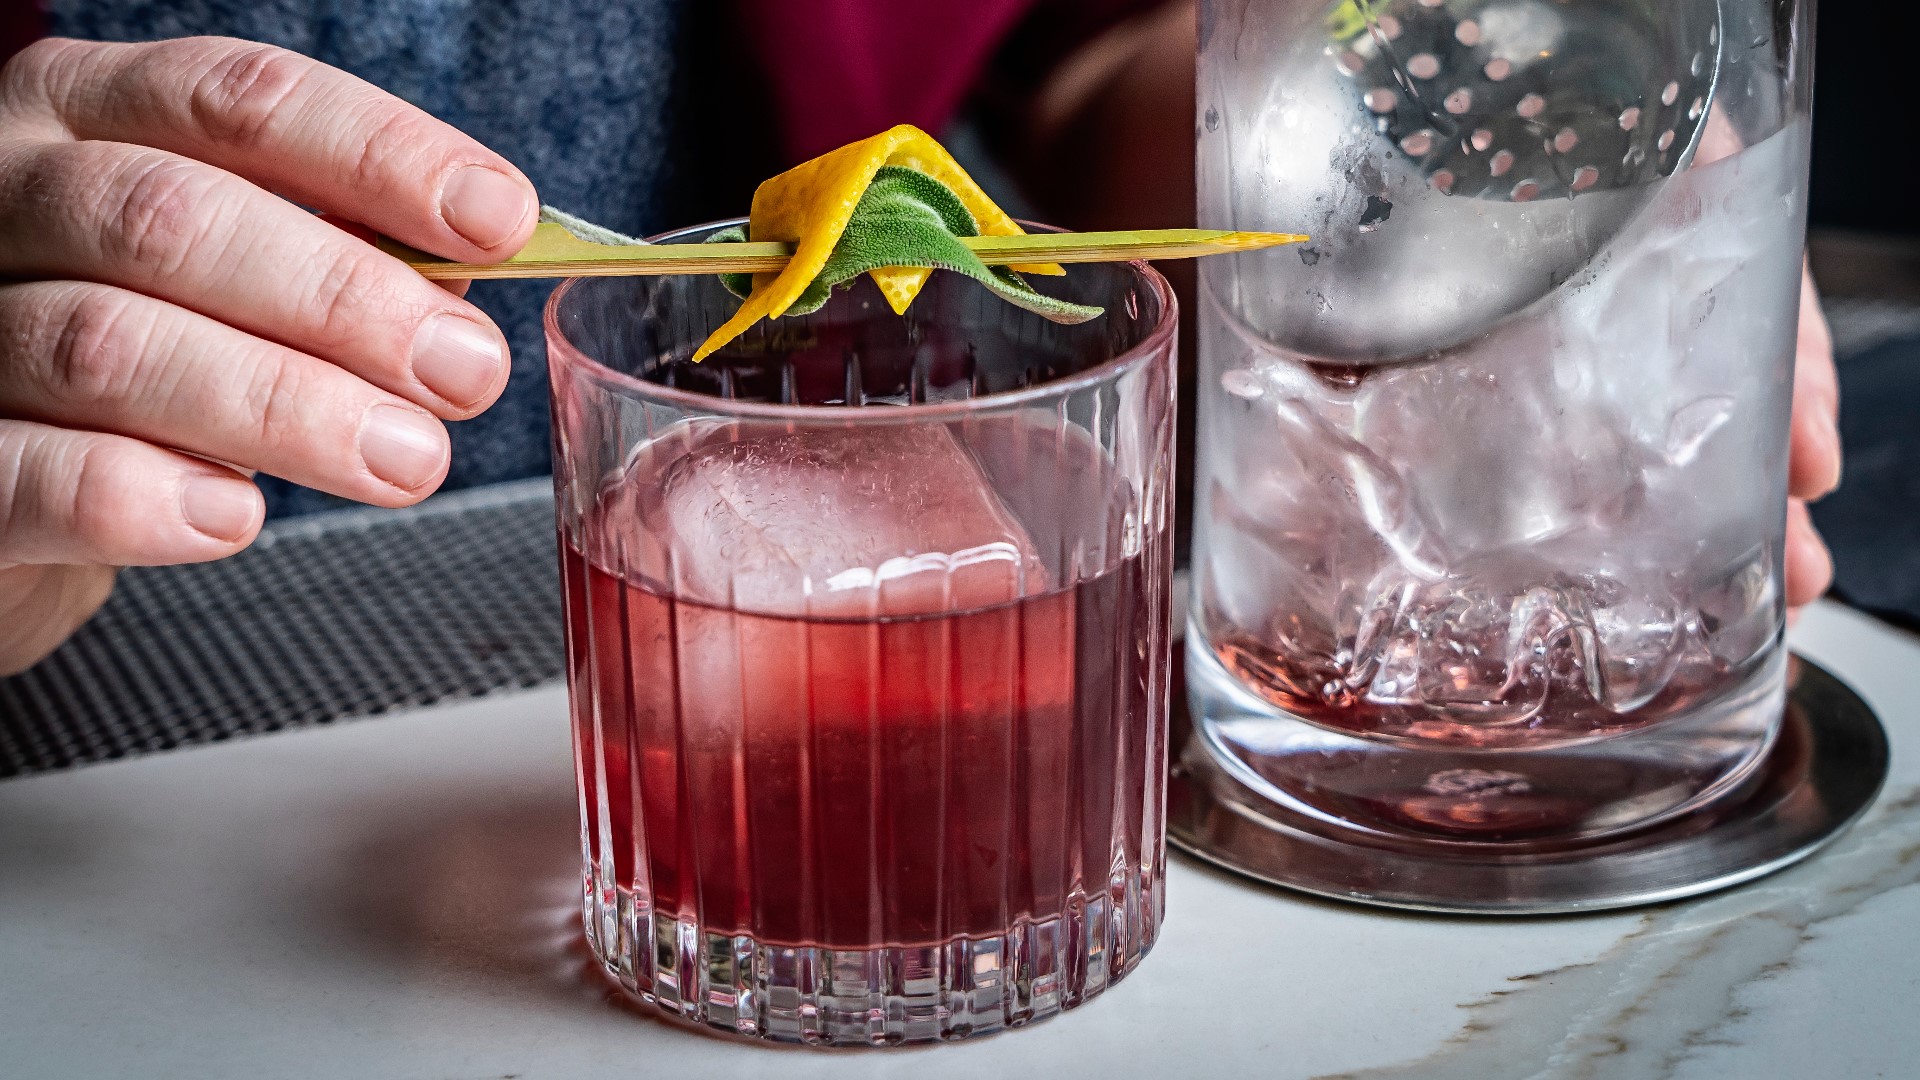 DC Cocktail Week is now through December 4th and we see what District Winery is making for the occasion with Michelle Hamo, District Winery Restaurant Manager.